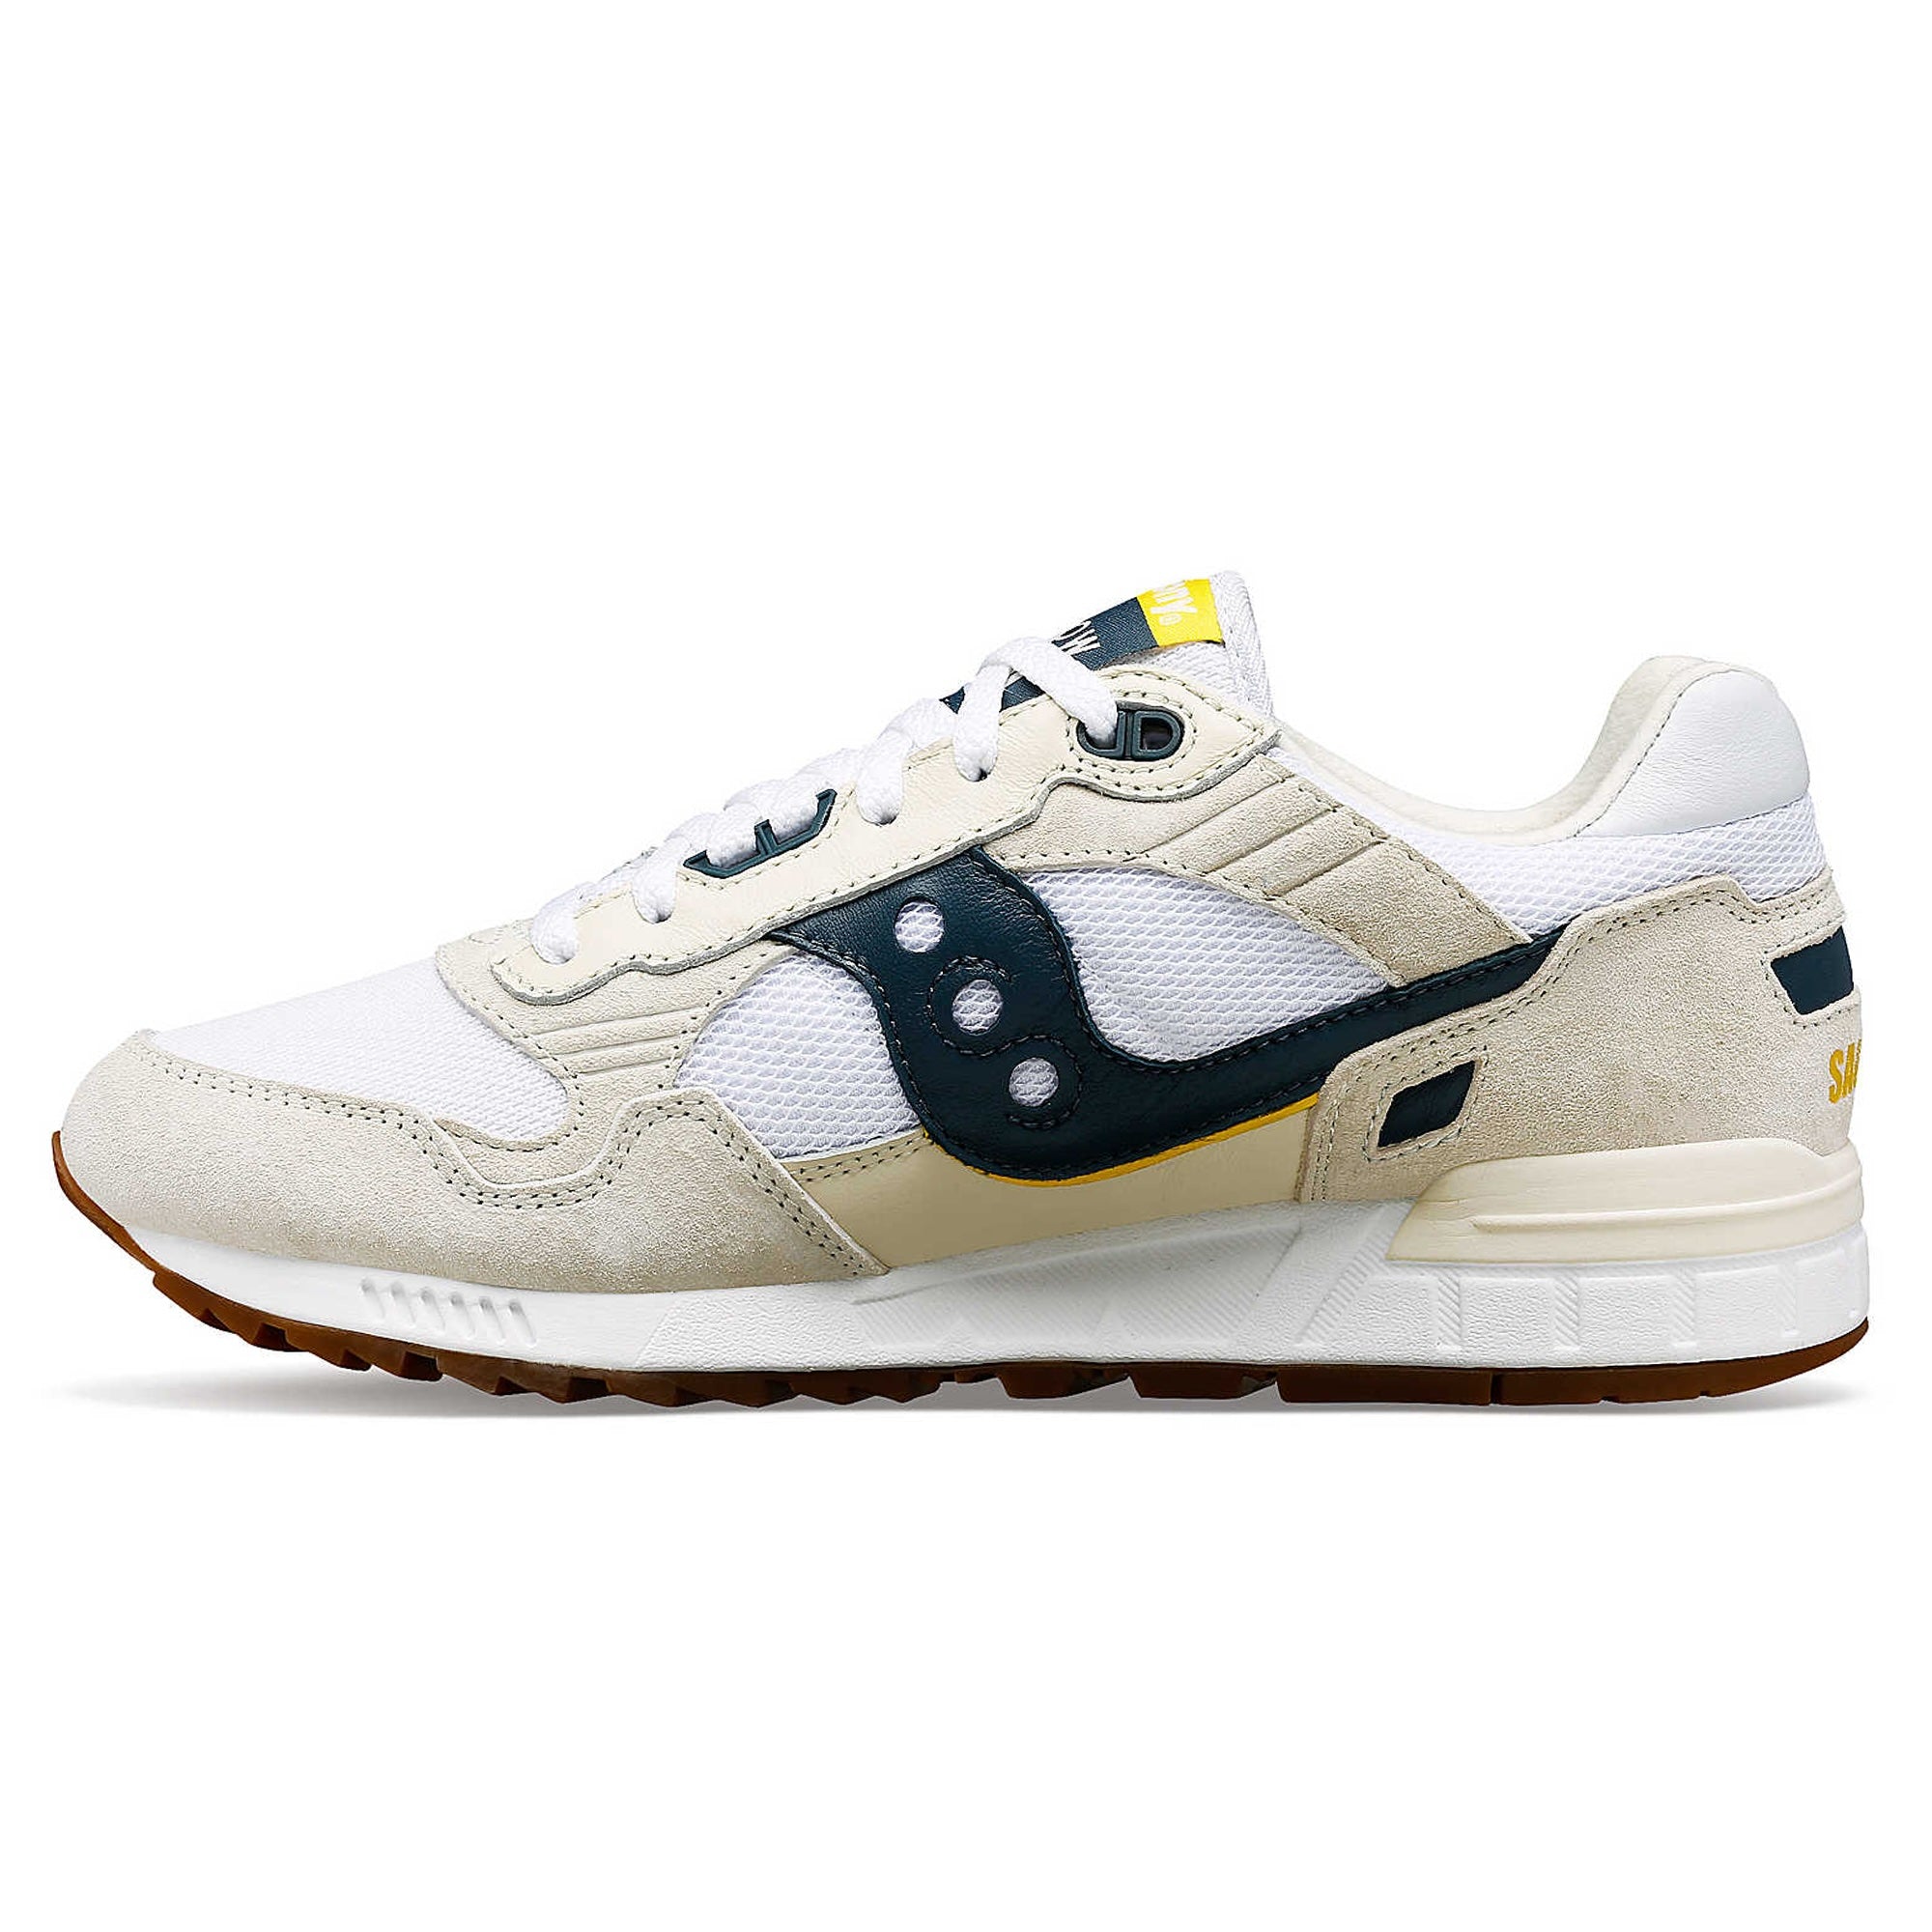 Saucony Shadow 5000 Premium "Ivy Prep Pack" Trainers - White/Navy